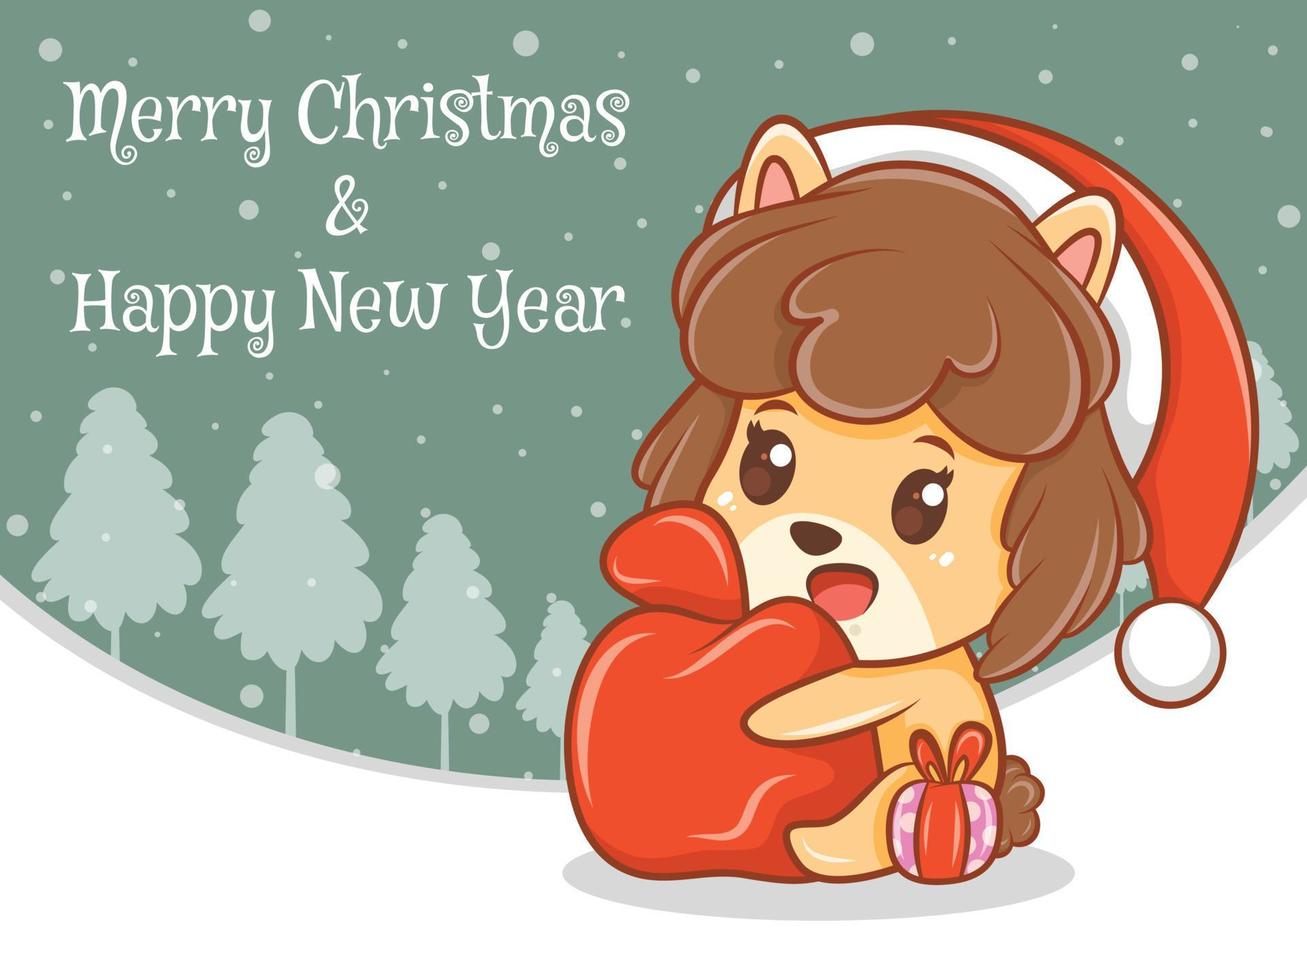 cute puppy cartoon character with merry Christmas and happy new year greeting banner. vector